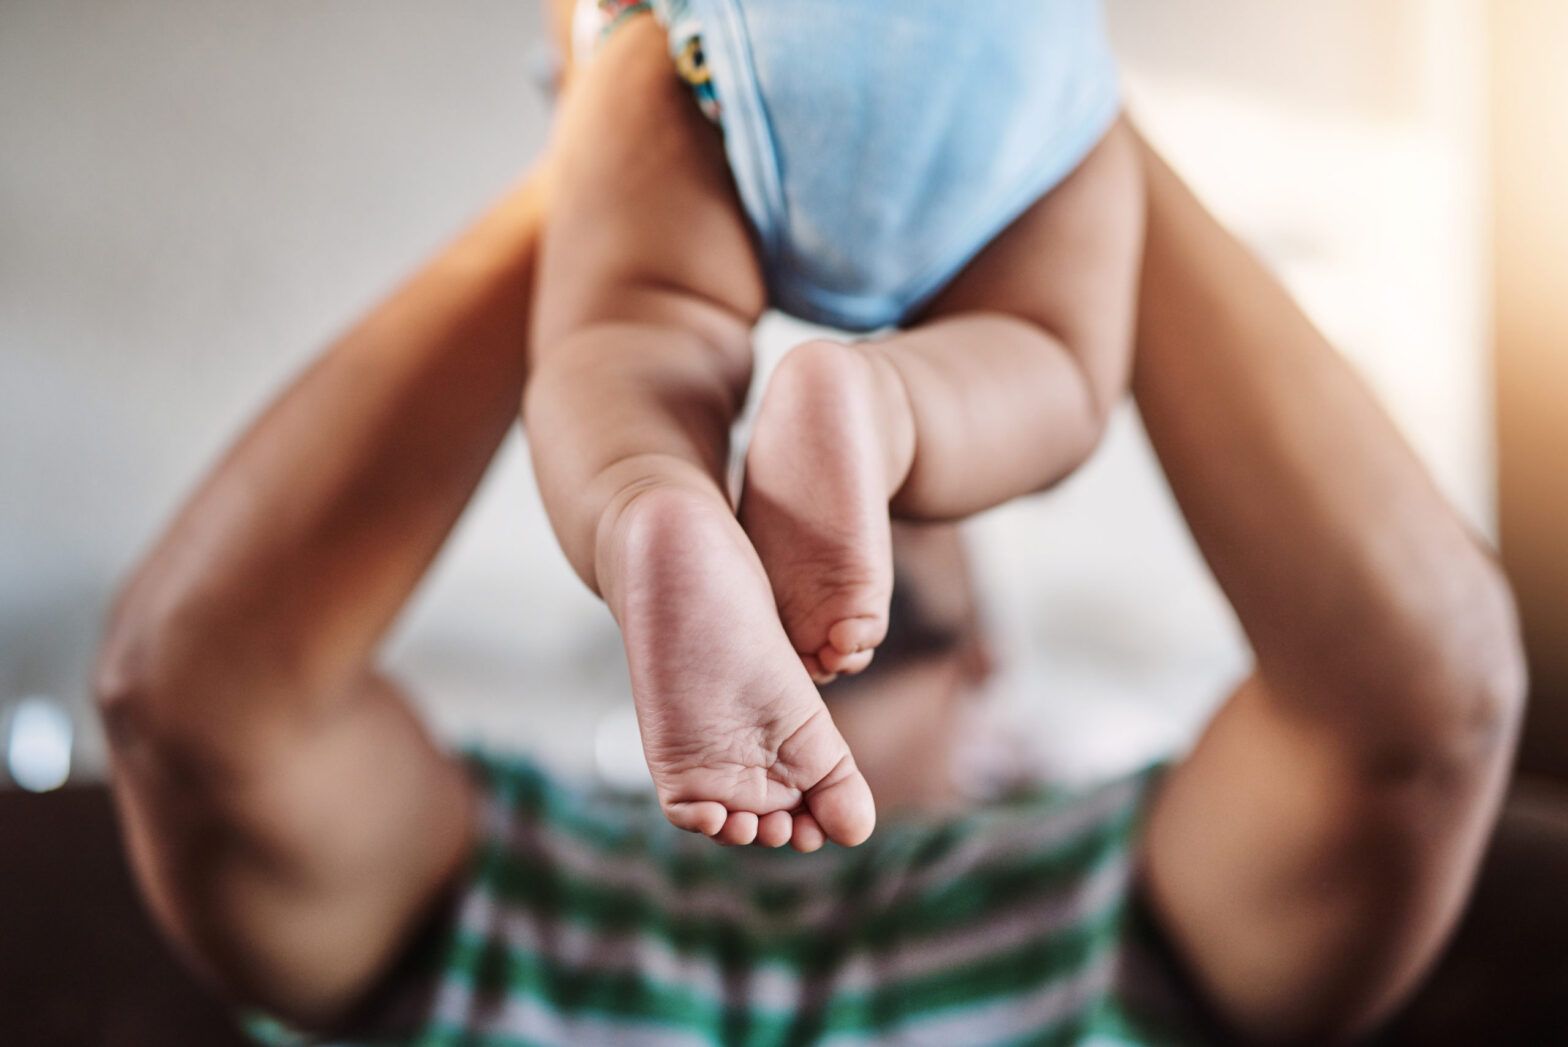 Just 5% of dads in asset management take full parental leave